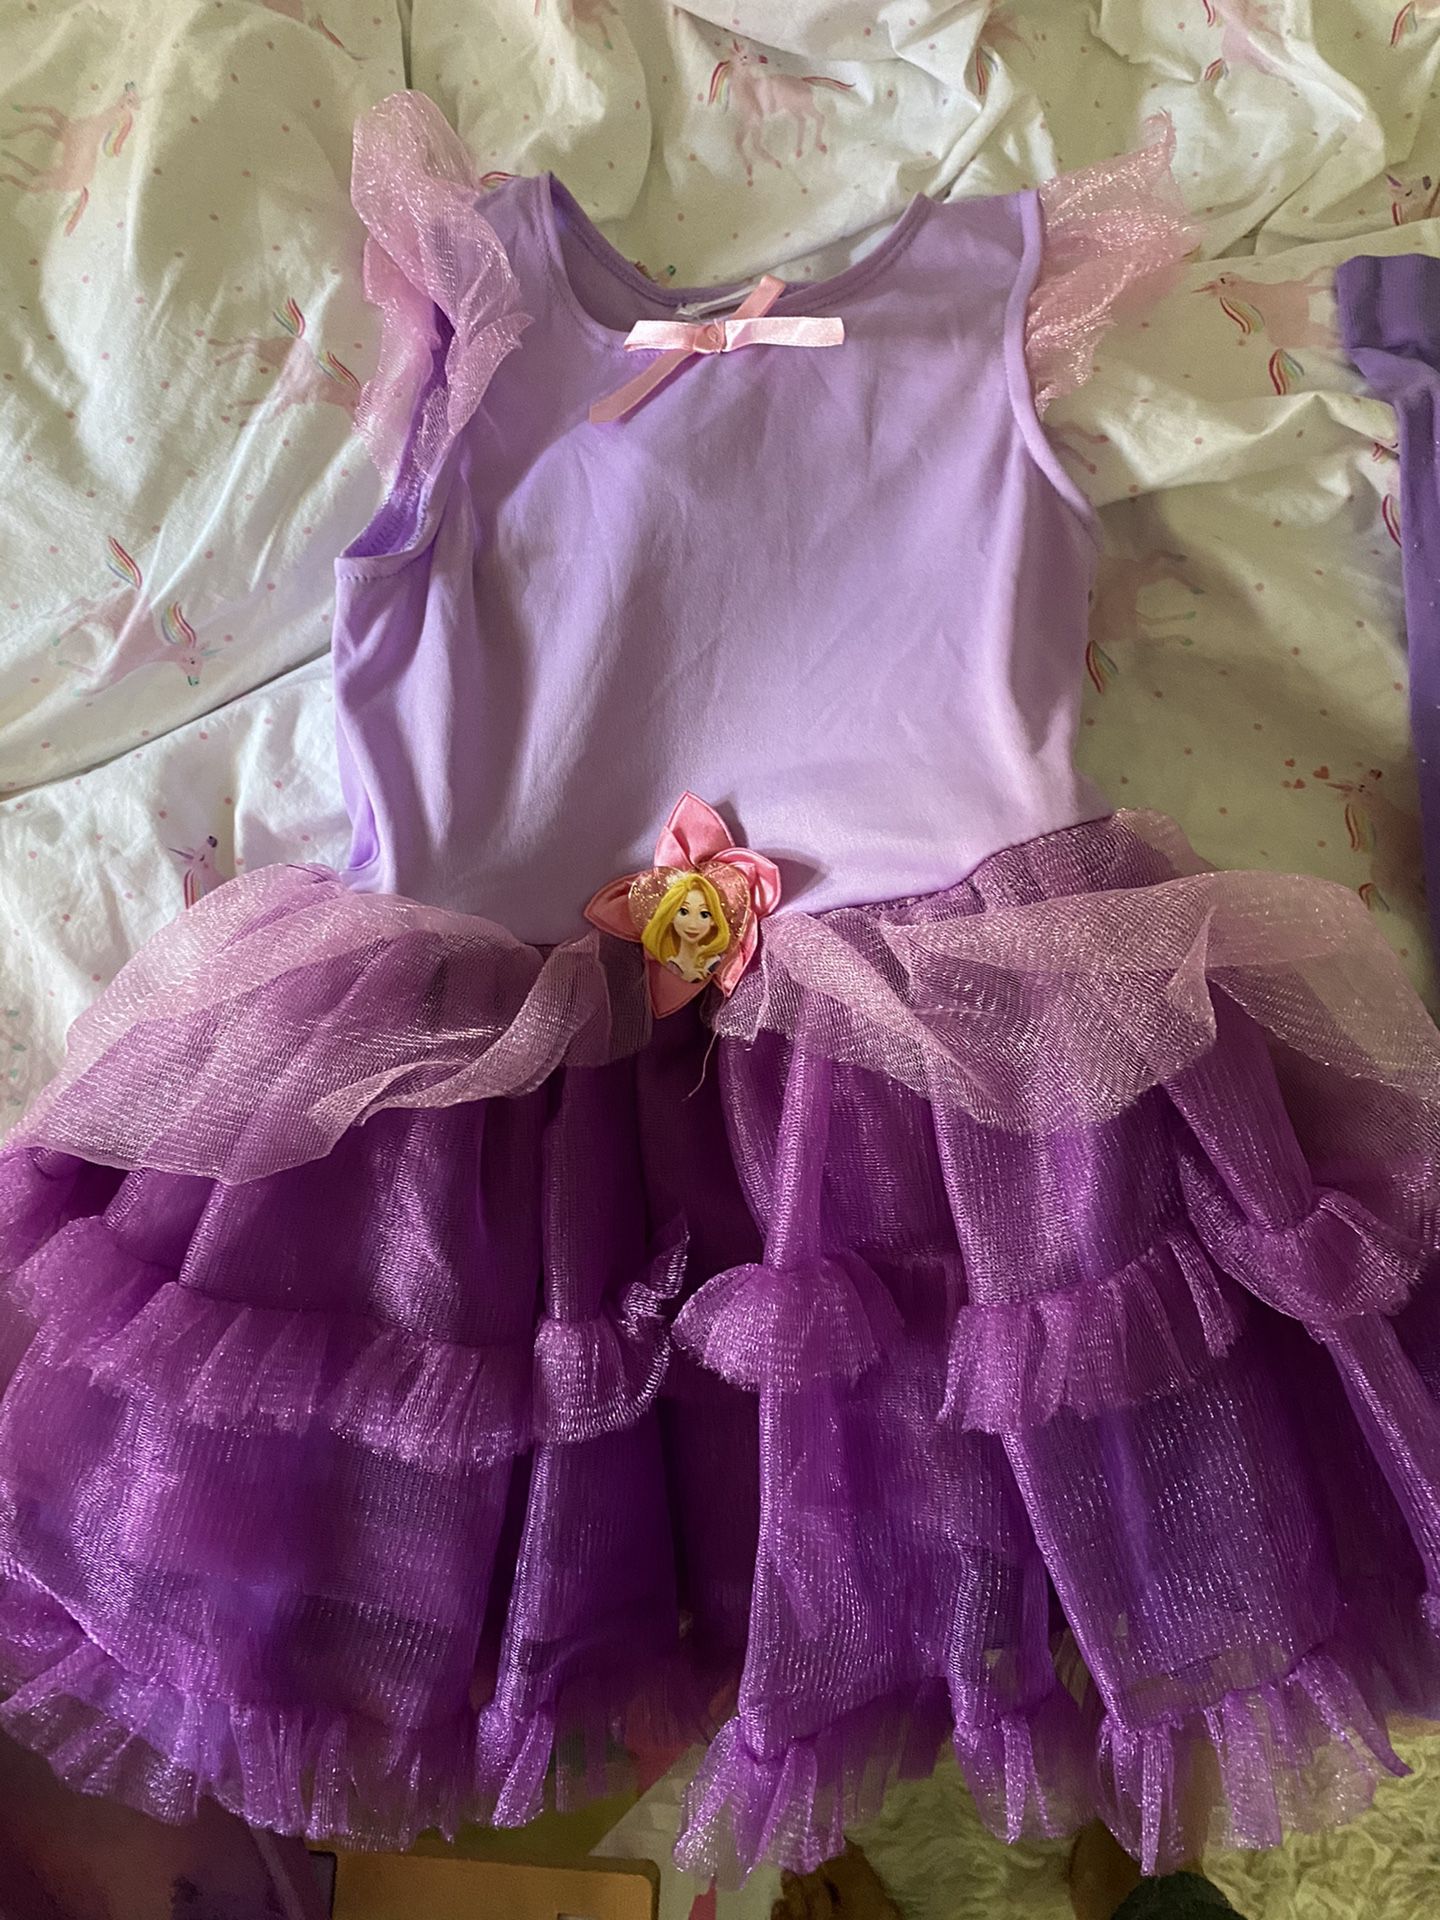 Rapunzel costume with matching leggings